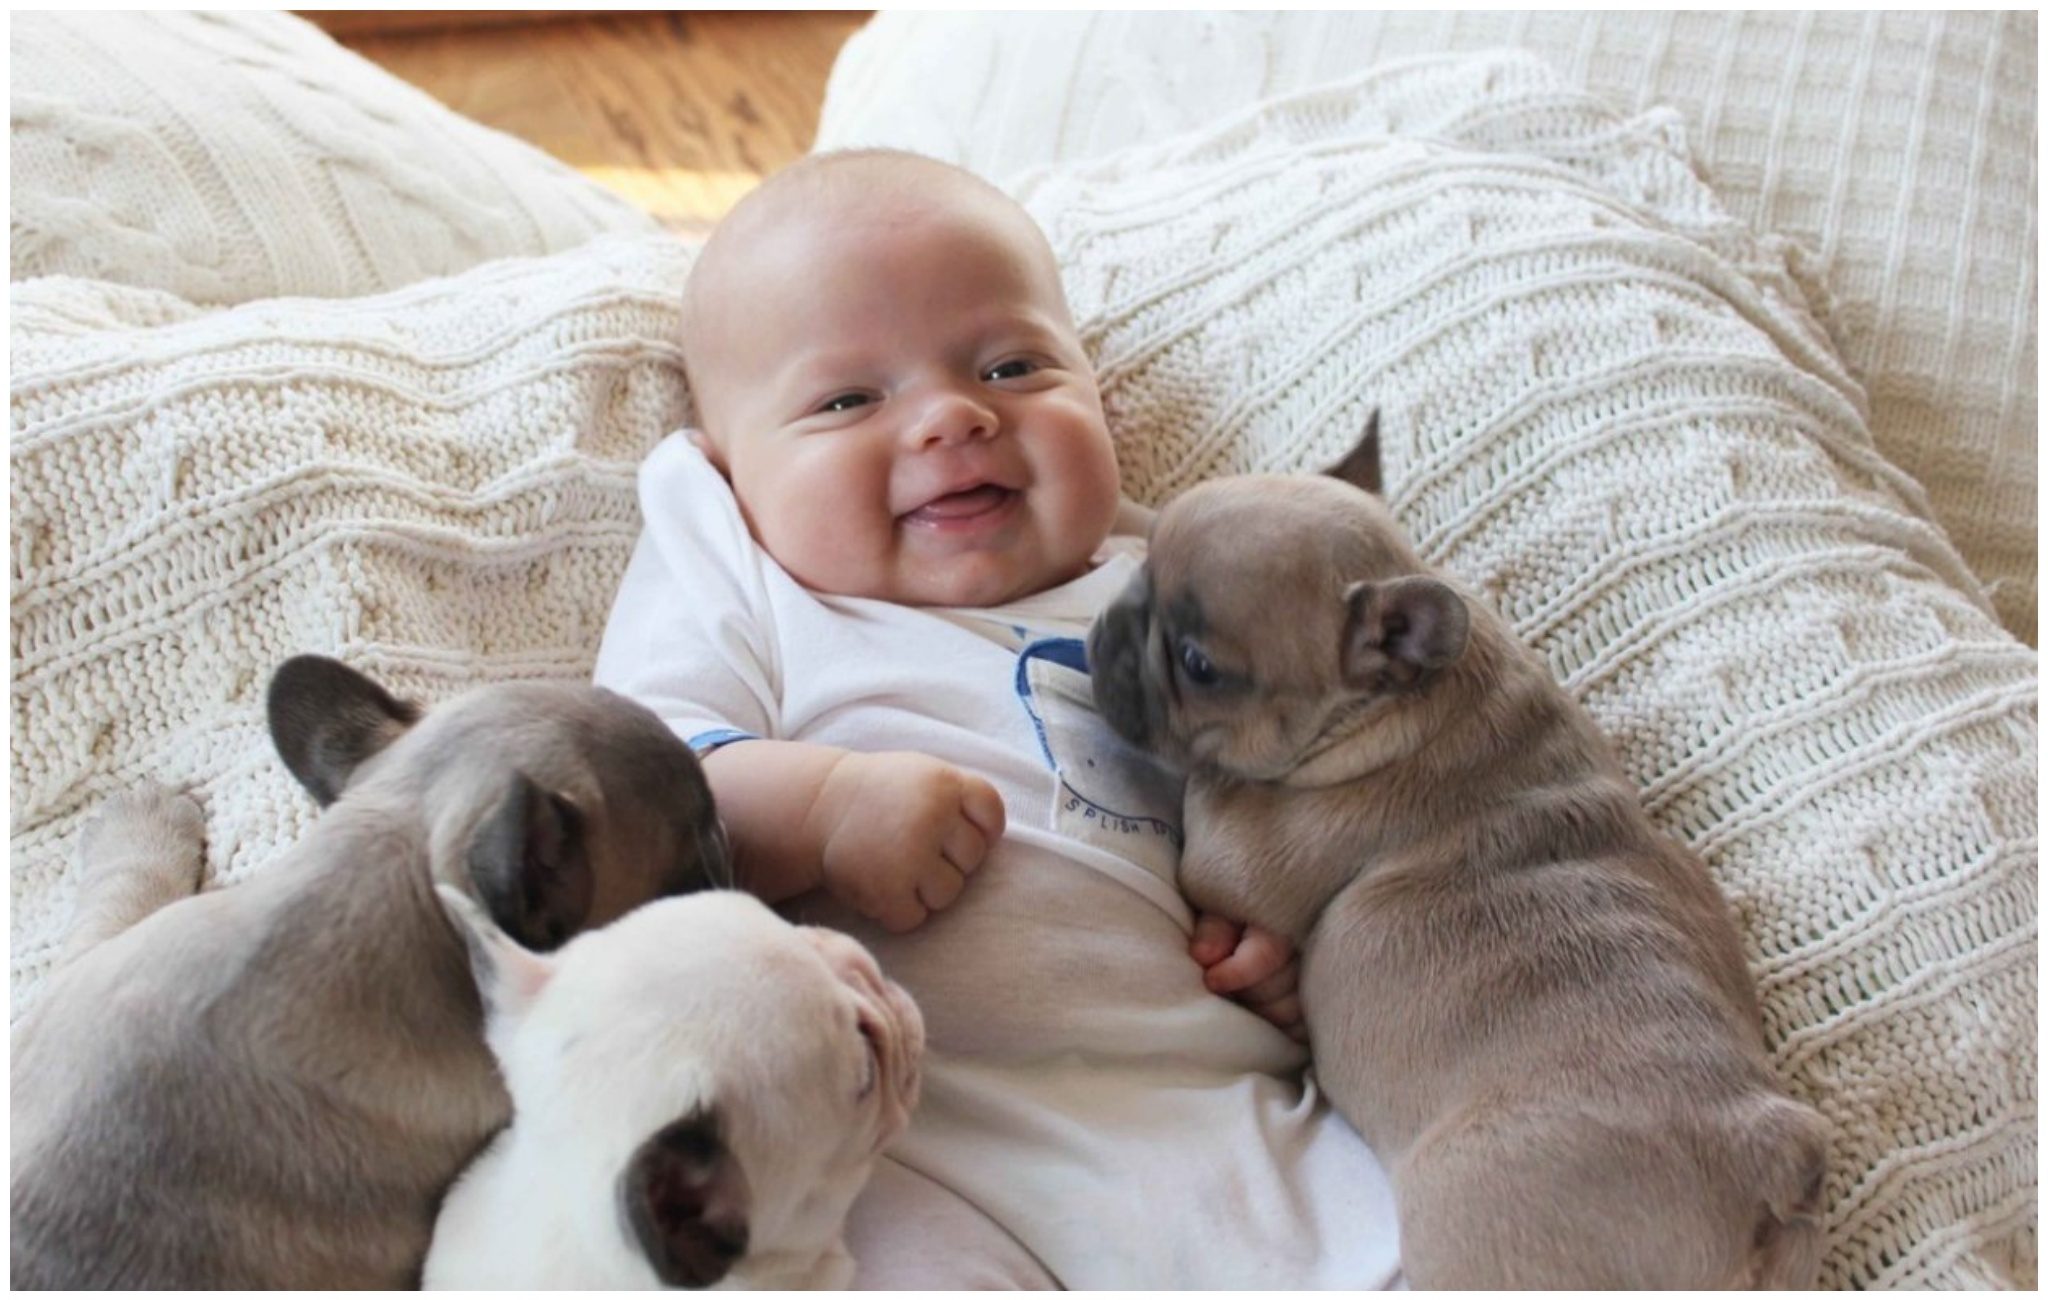 A mother’s heart melts when she sees the special bond between her newborn son and her three dogs.